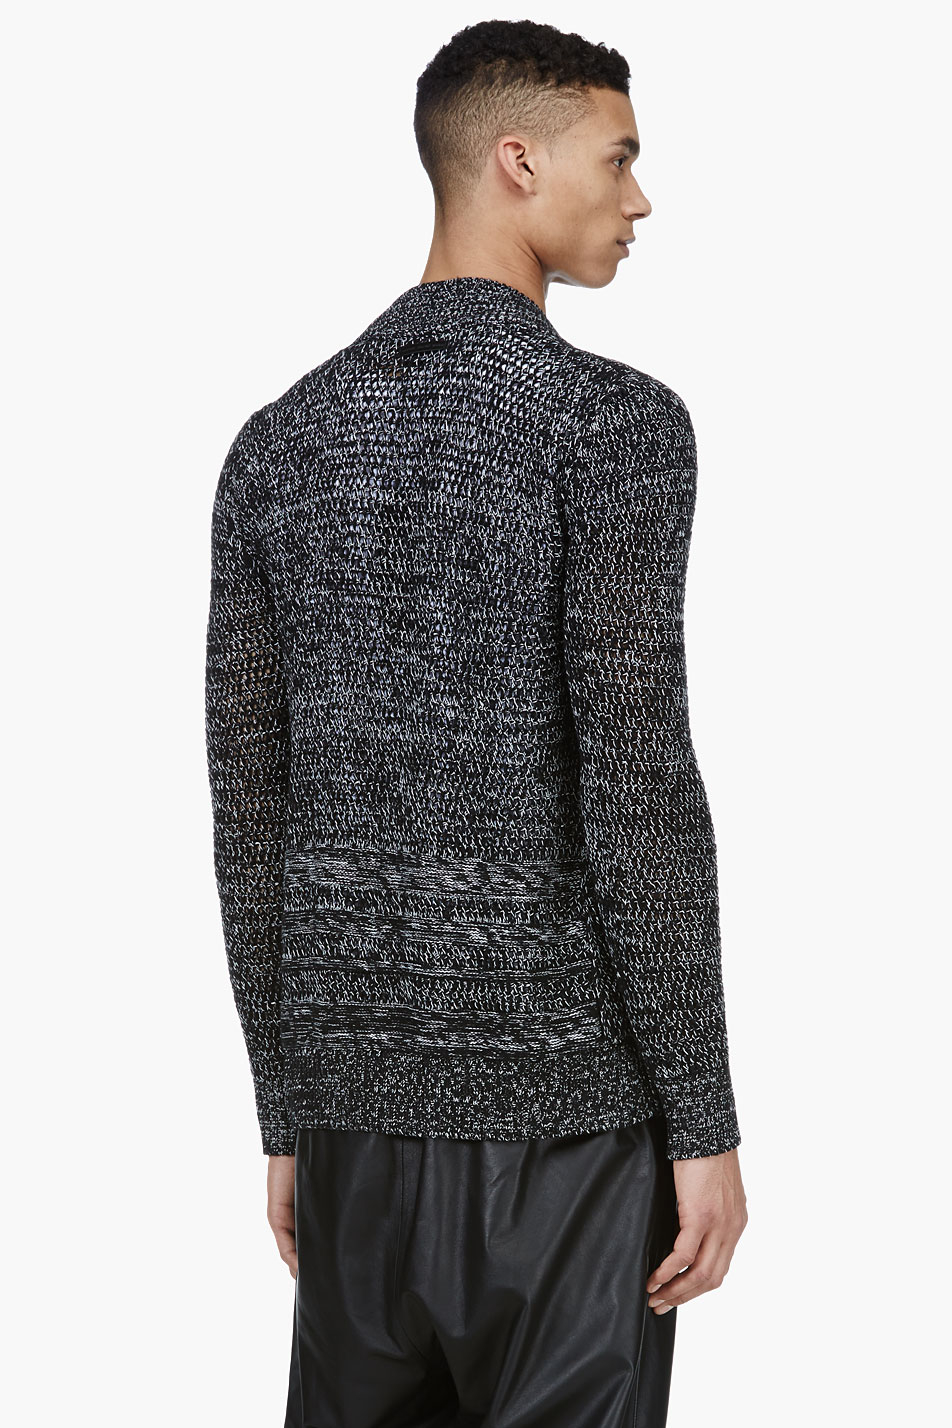 Lyst - Diesel Black Gold Black and White Open Knit Cardigan in Black ...